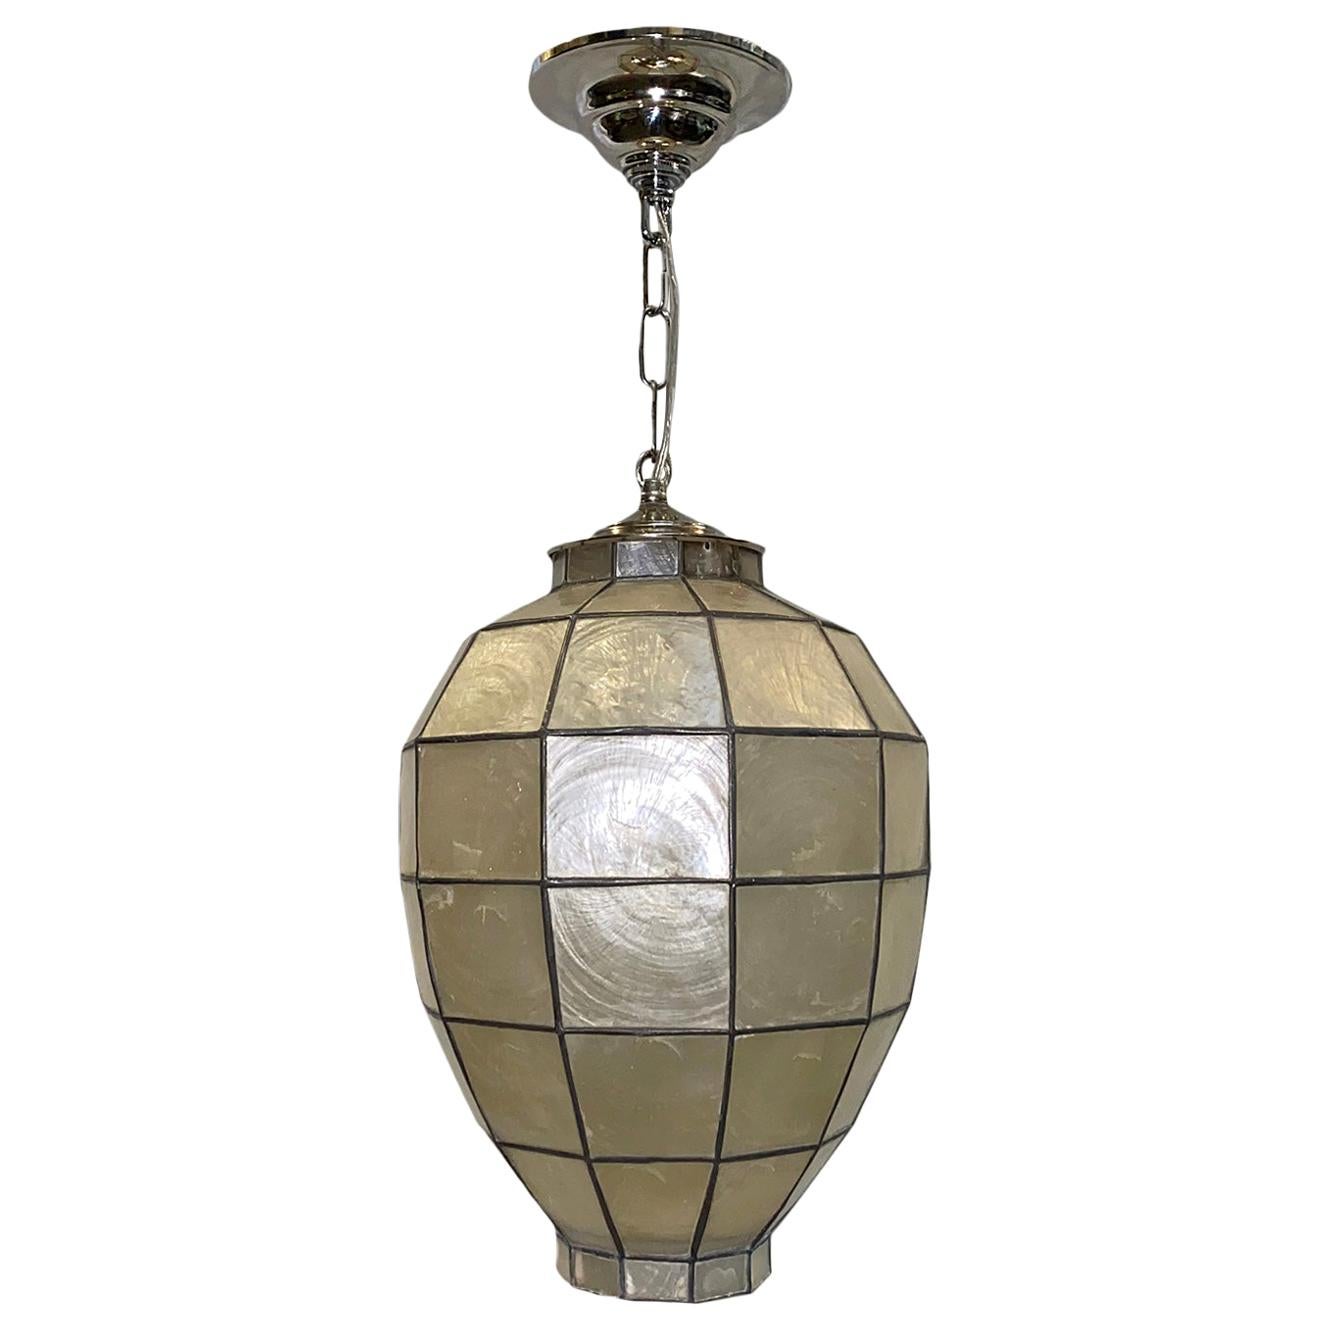 A French circa 1960s nickel-plated and capiz lantern with one Edison interior light.

Measurements:
Height of body: 15